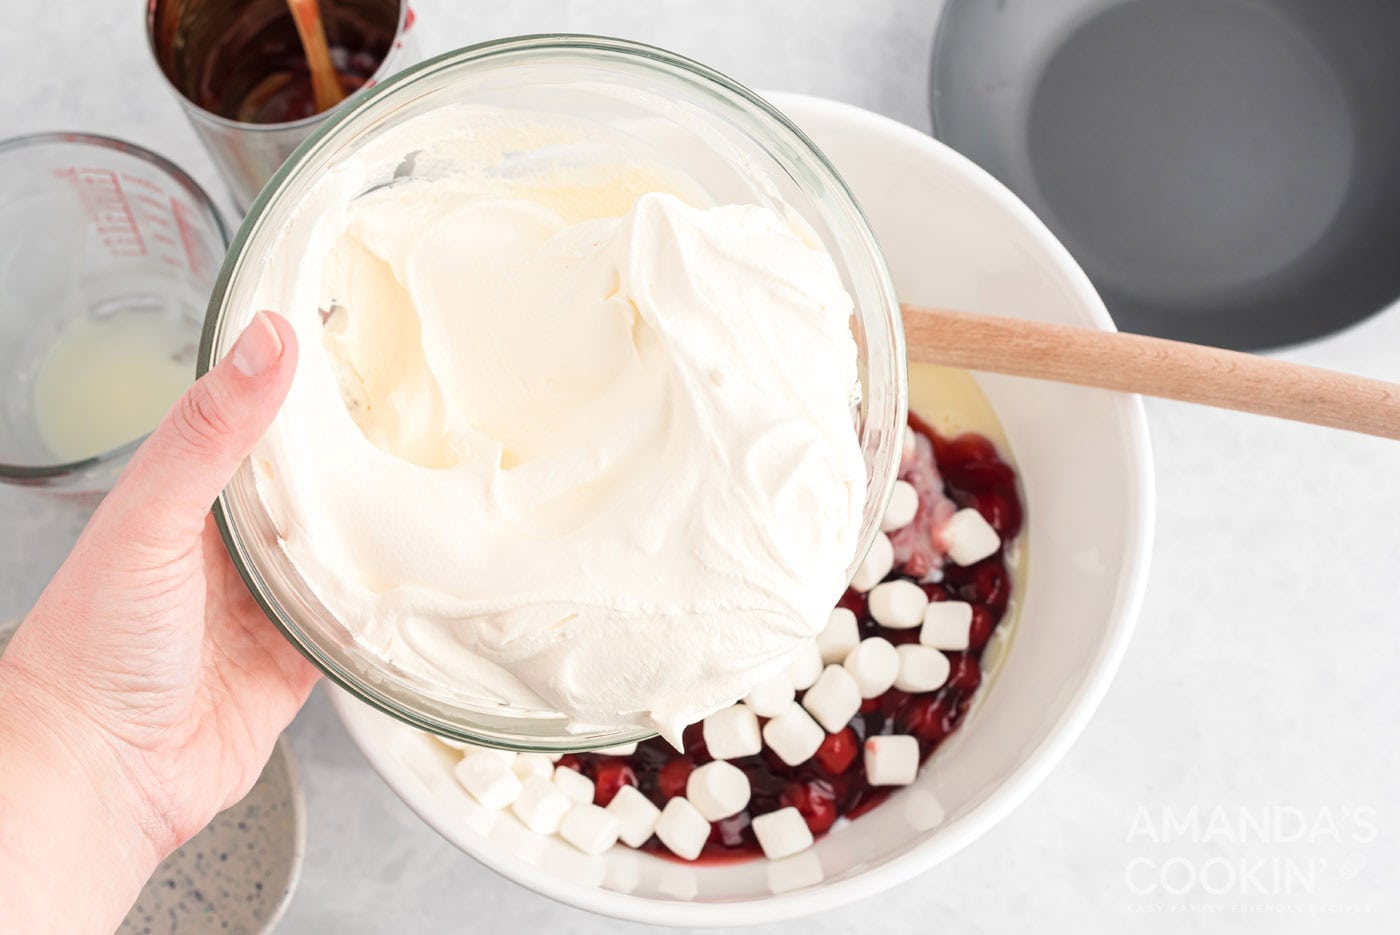 Adding cool whip to other ingredients in a bowl